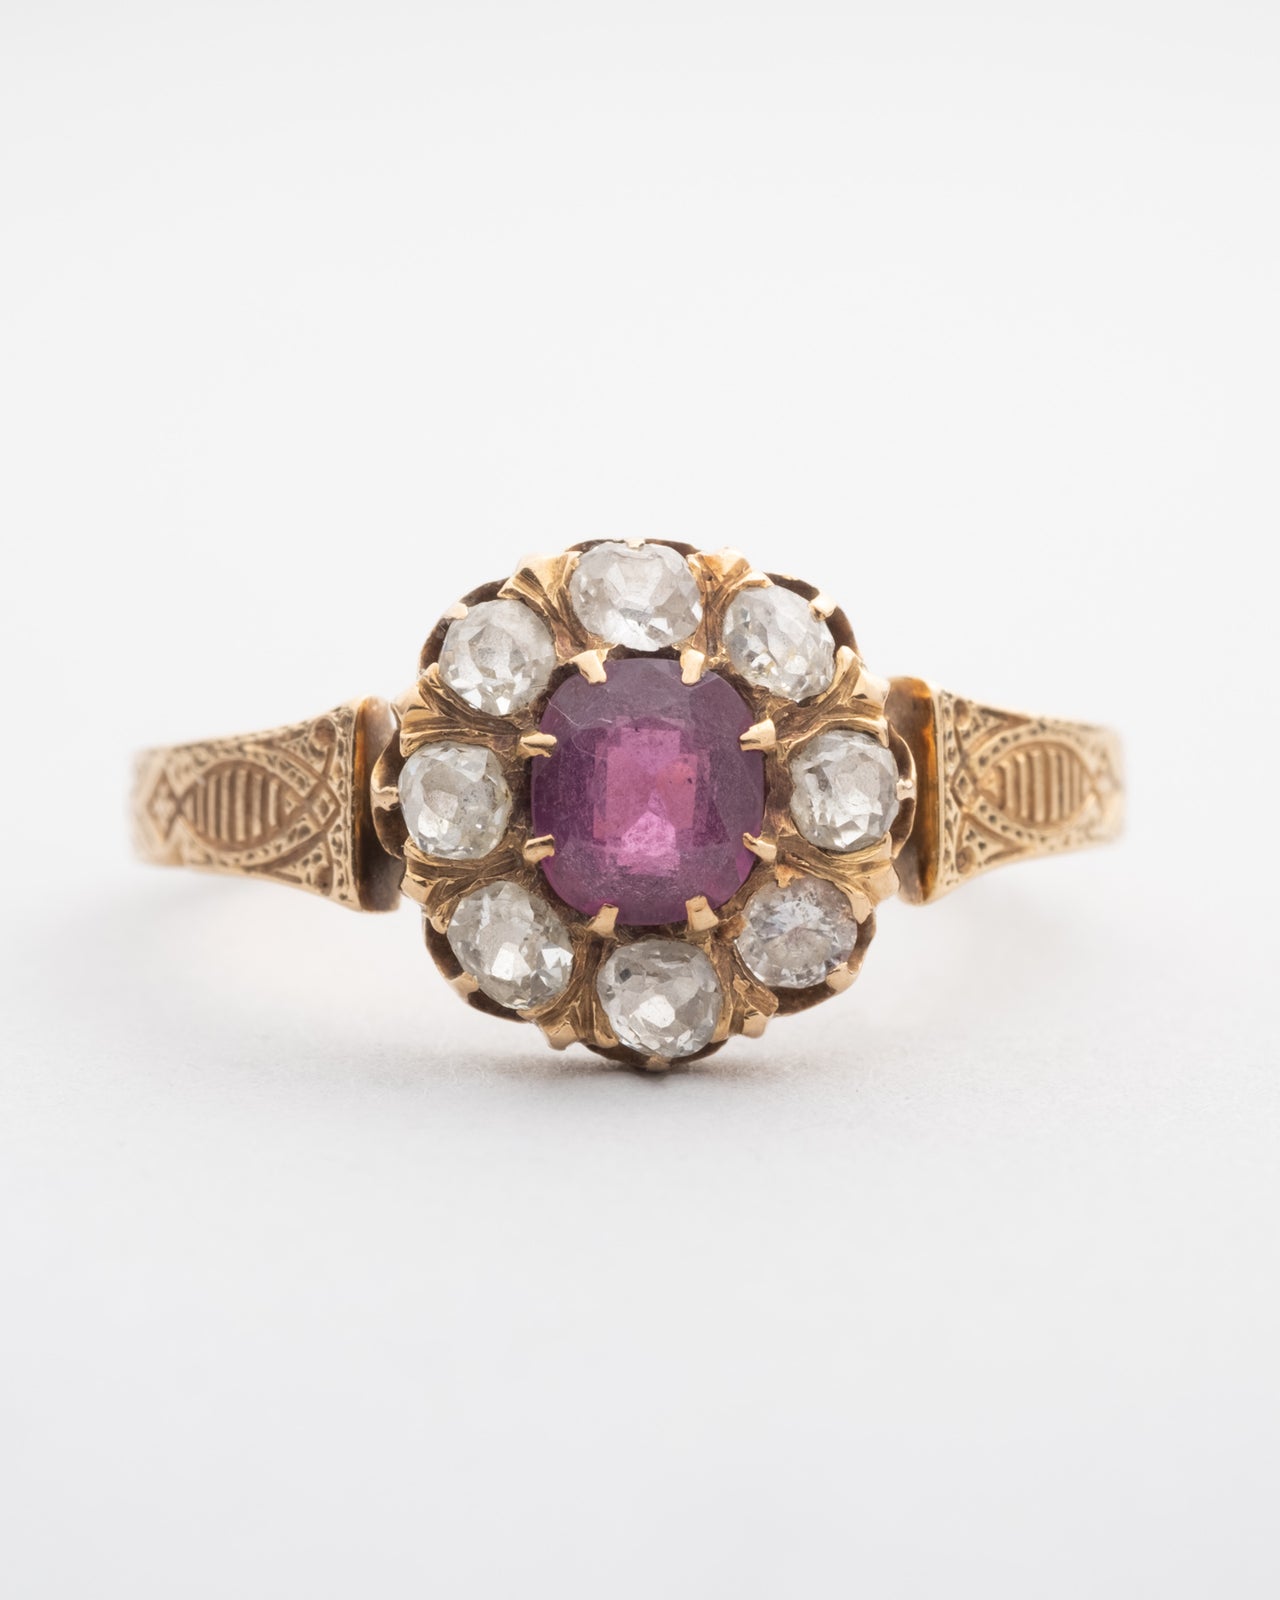 Antique Ruby and Rose Cut Diamond Halo Ring in 14k Gold - Photo 2